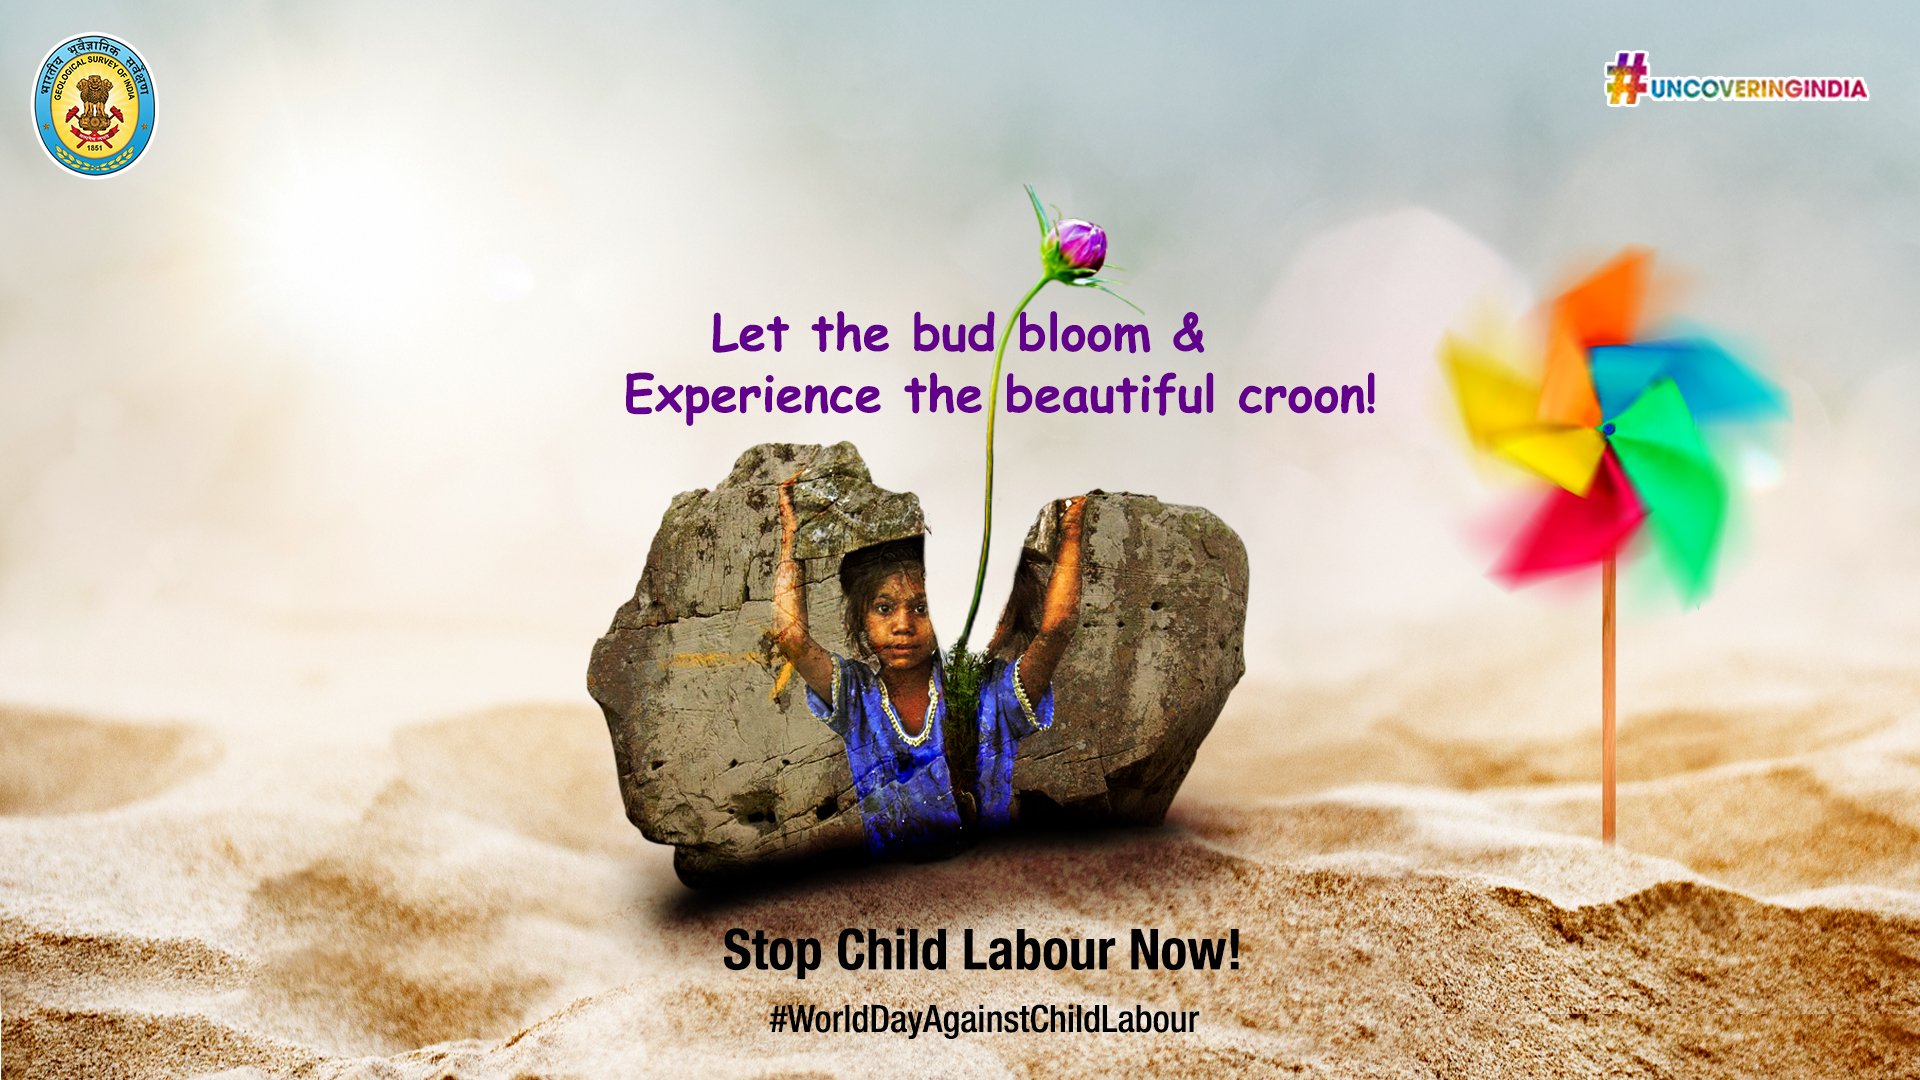 Geological Survey Of India Every Year On 12th June World Day Against Child Labour Is Celebrated To Raise Awareness About Child Labour And The Necessary Preventive Action Needed To Curb